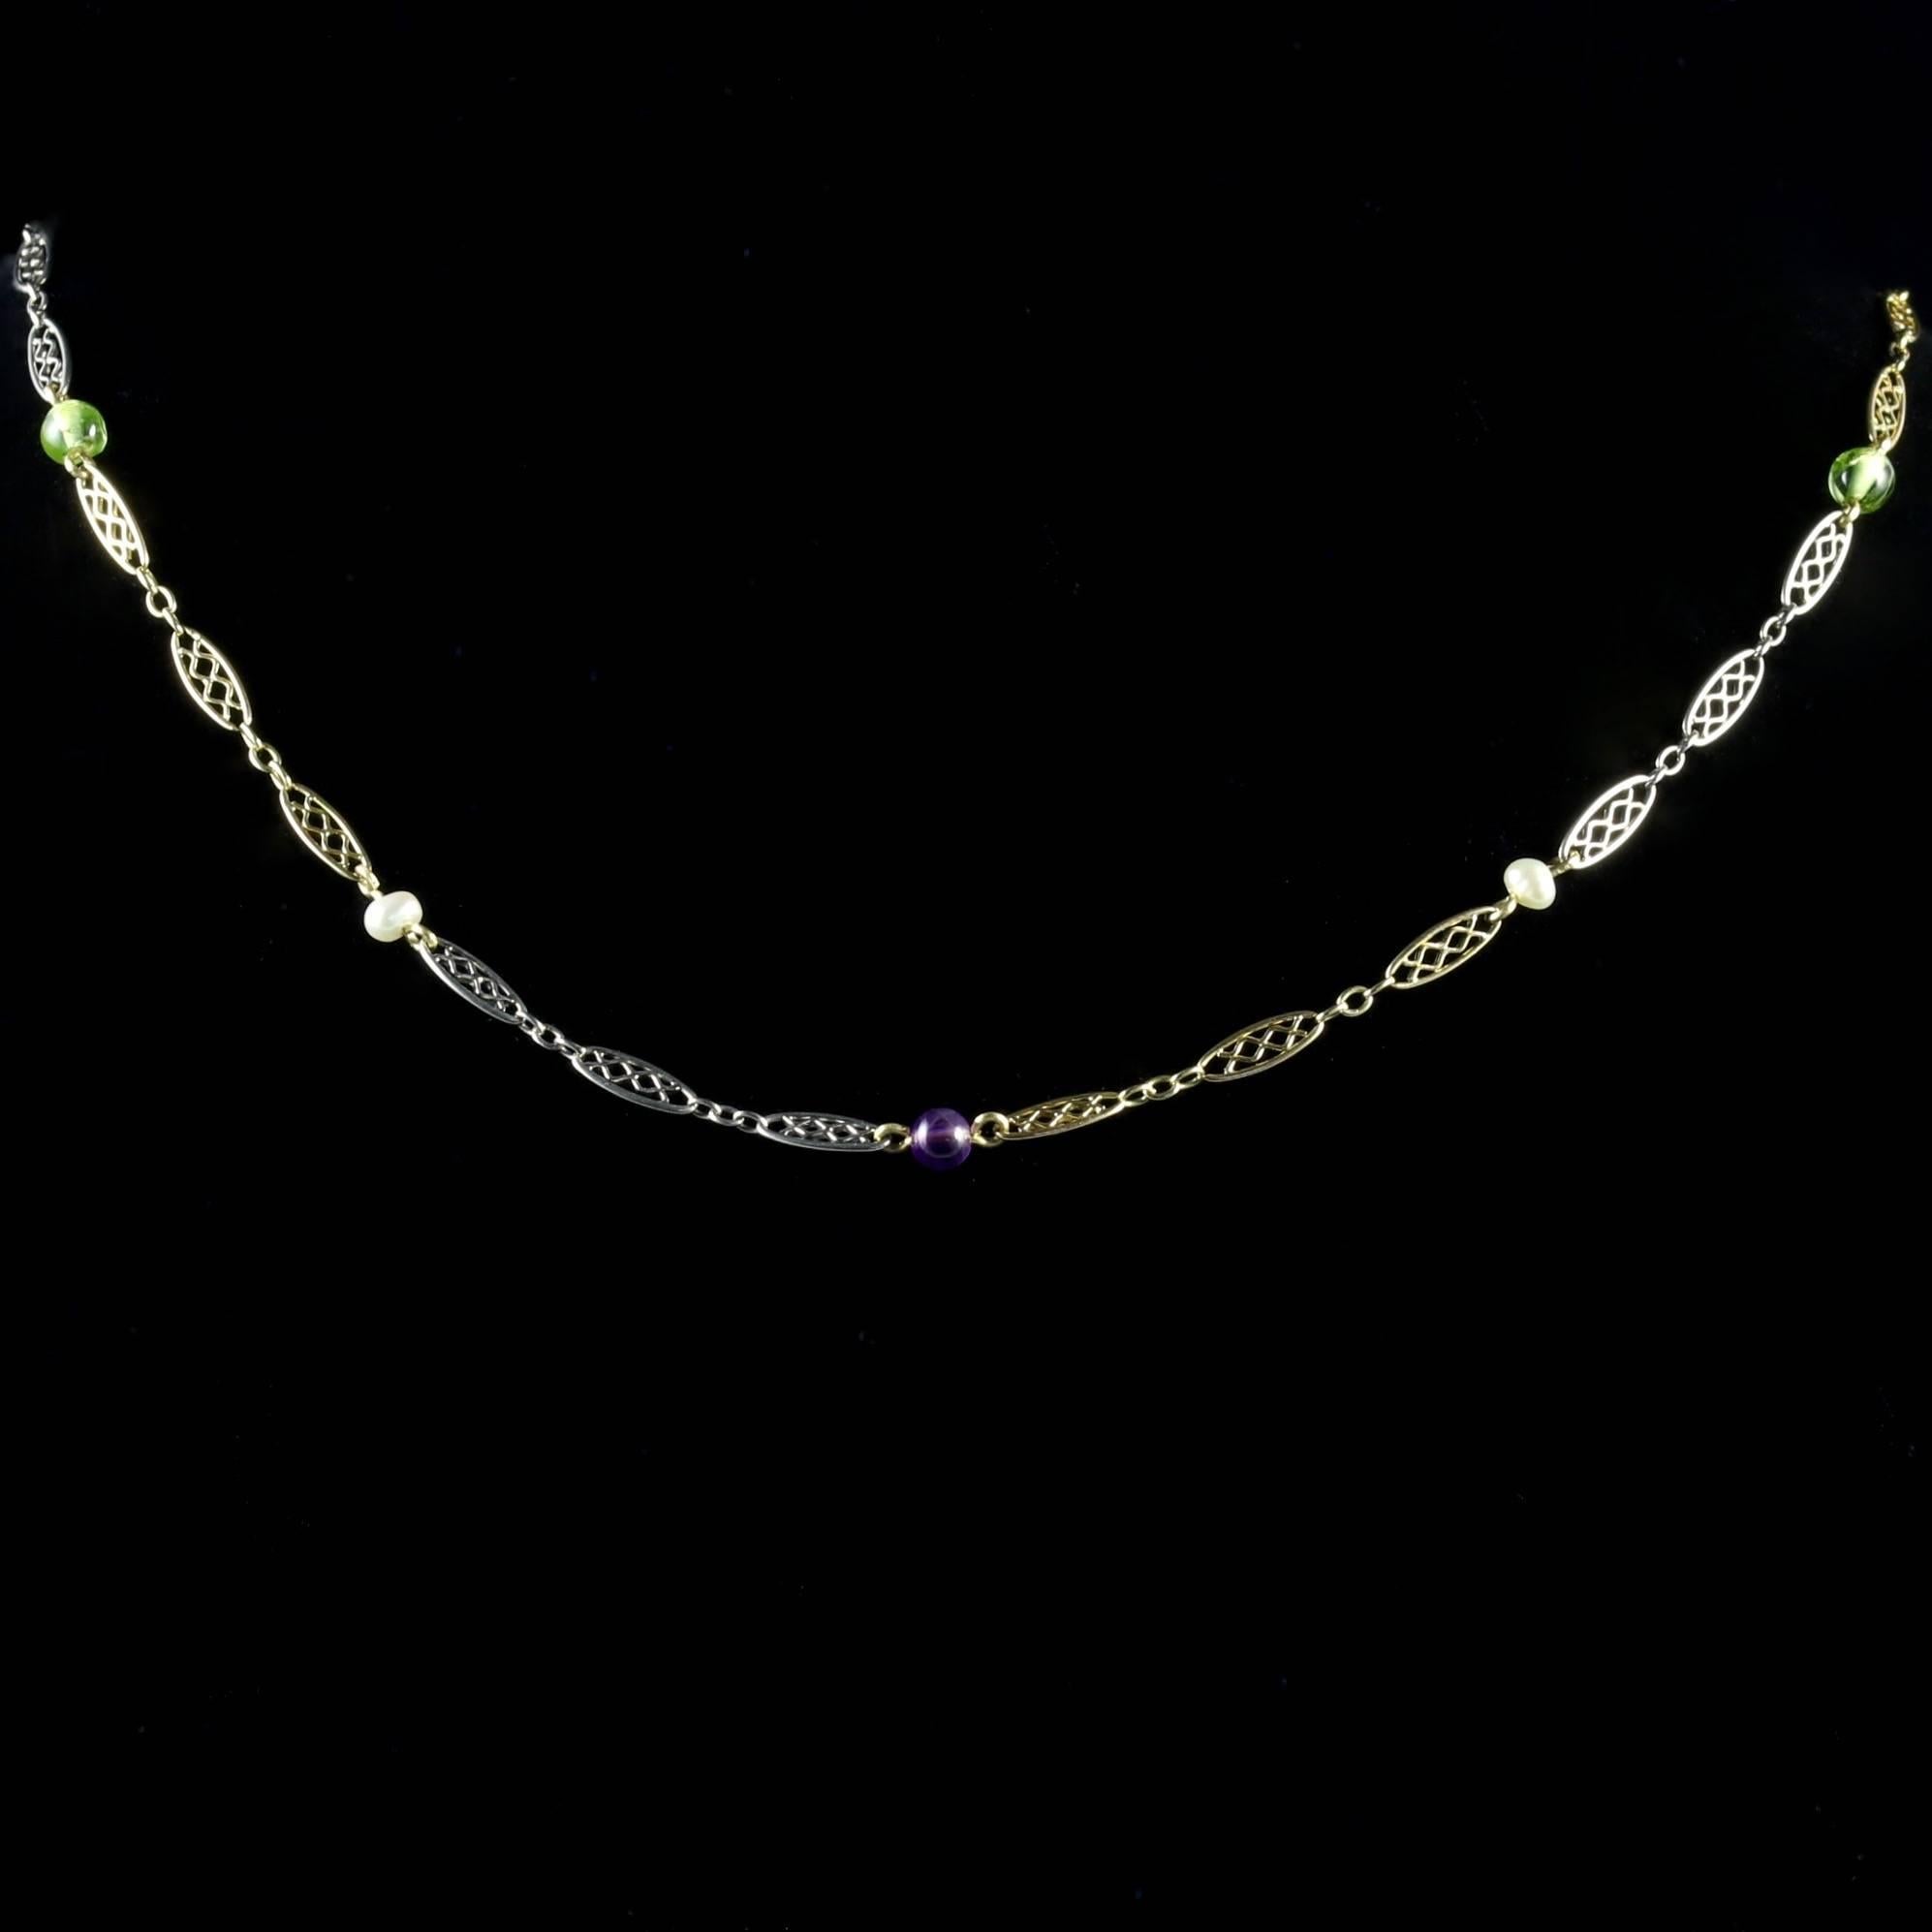 This fabulous Suffragette necklace is set in 18ct Yellow Gold and Platinum.

Emmeline Pankhurst was the leader of the British Suffragette movement in the 19th century and through her efforts won the right for women to vote.

Suffragettes liked to be